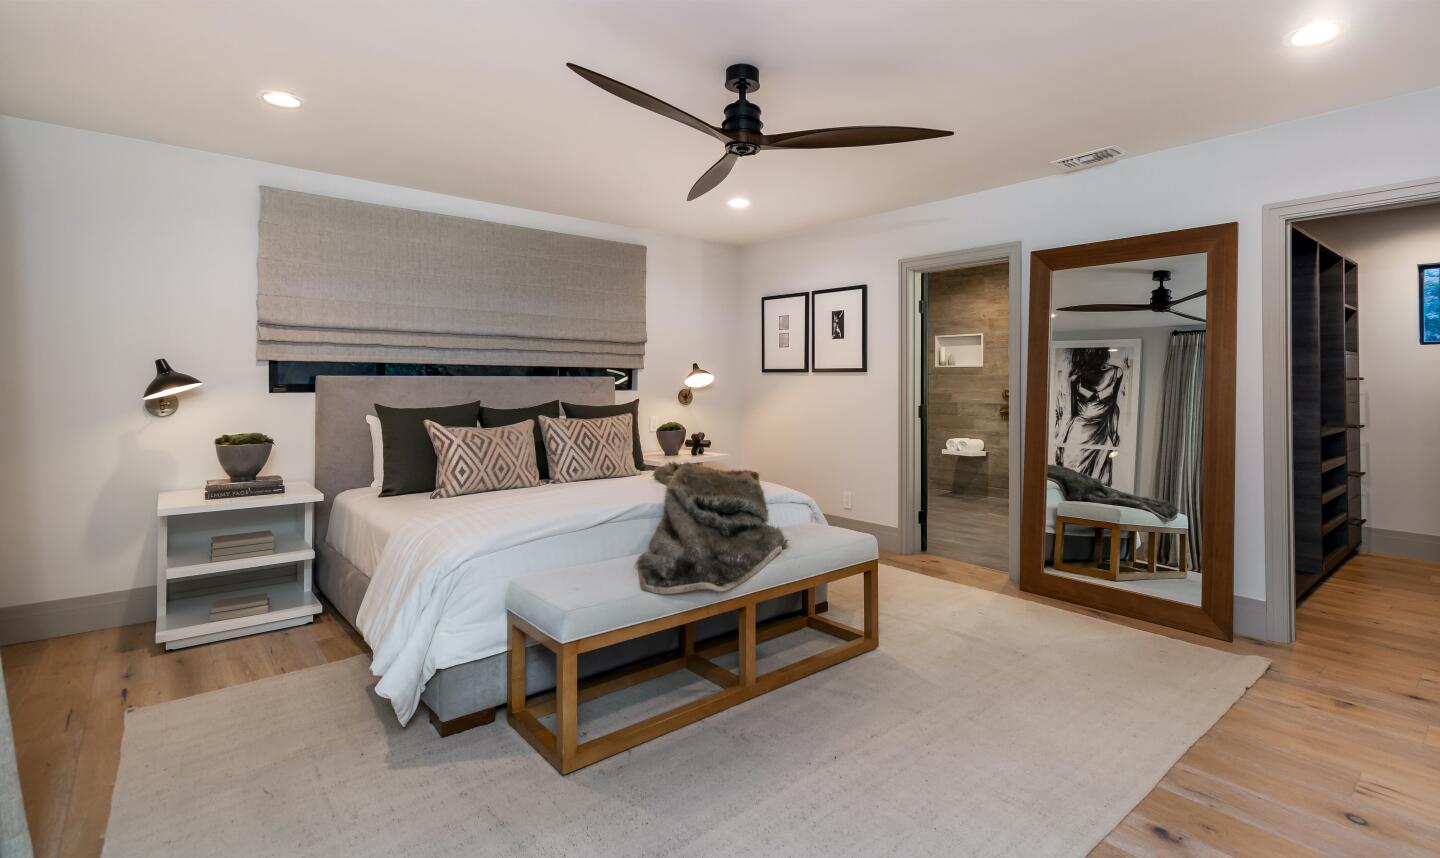 The furnished primary bedroom with a ceiling fan.